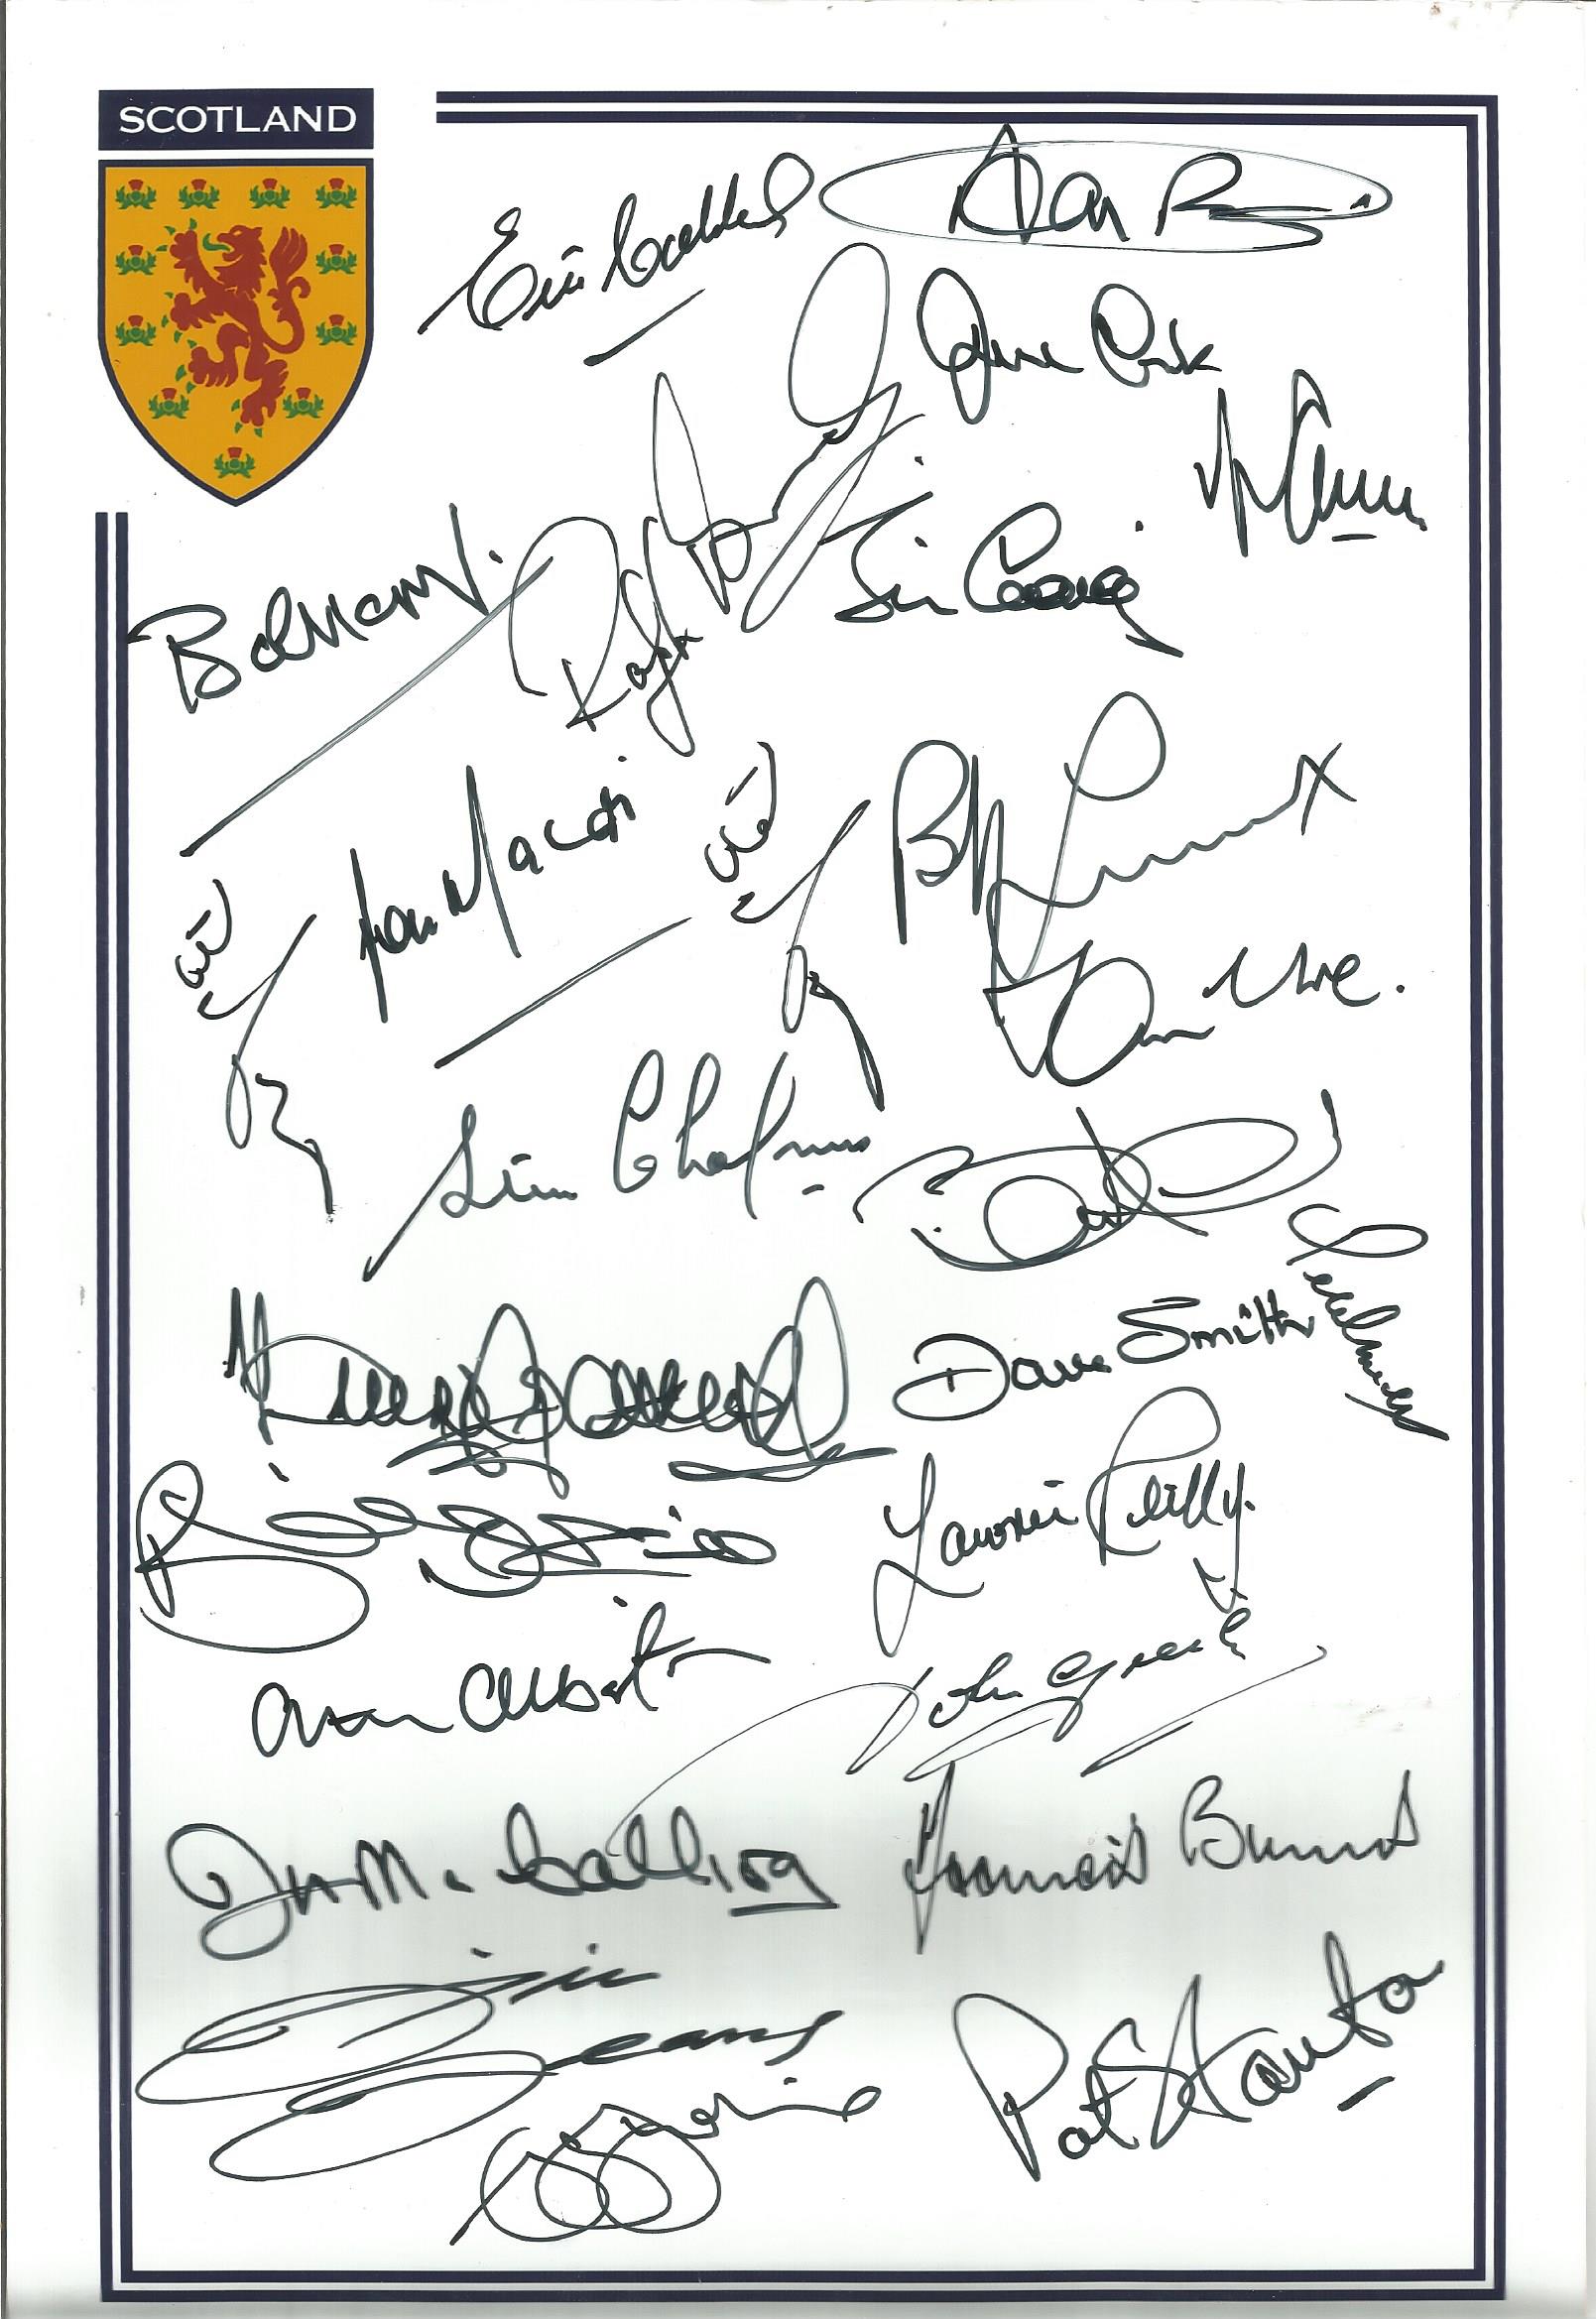 Football Autographed 12 X 8 Photo, Scotland, A Superbly Designed Photo With The Scotland Crest And